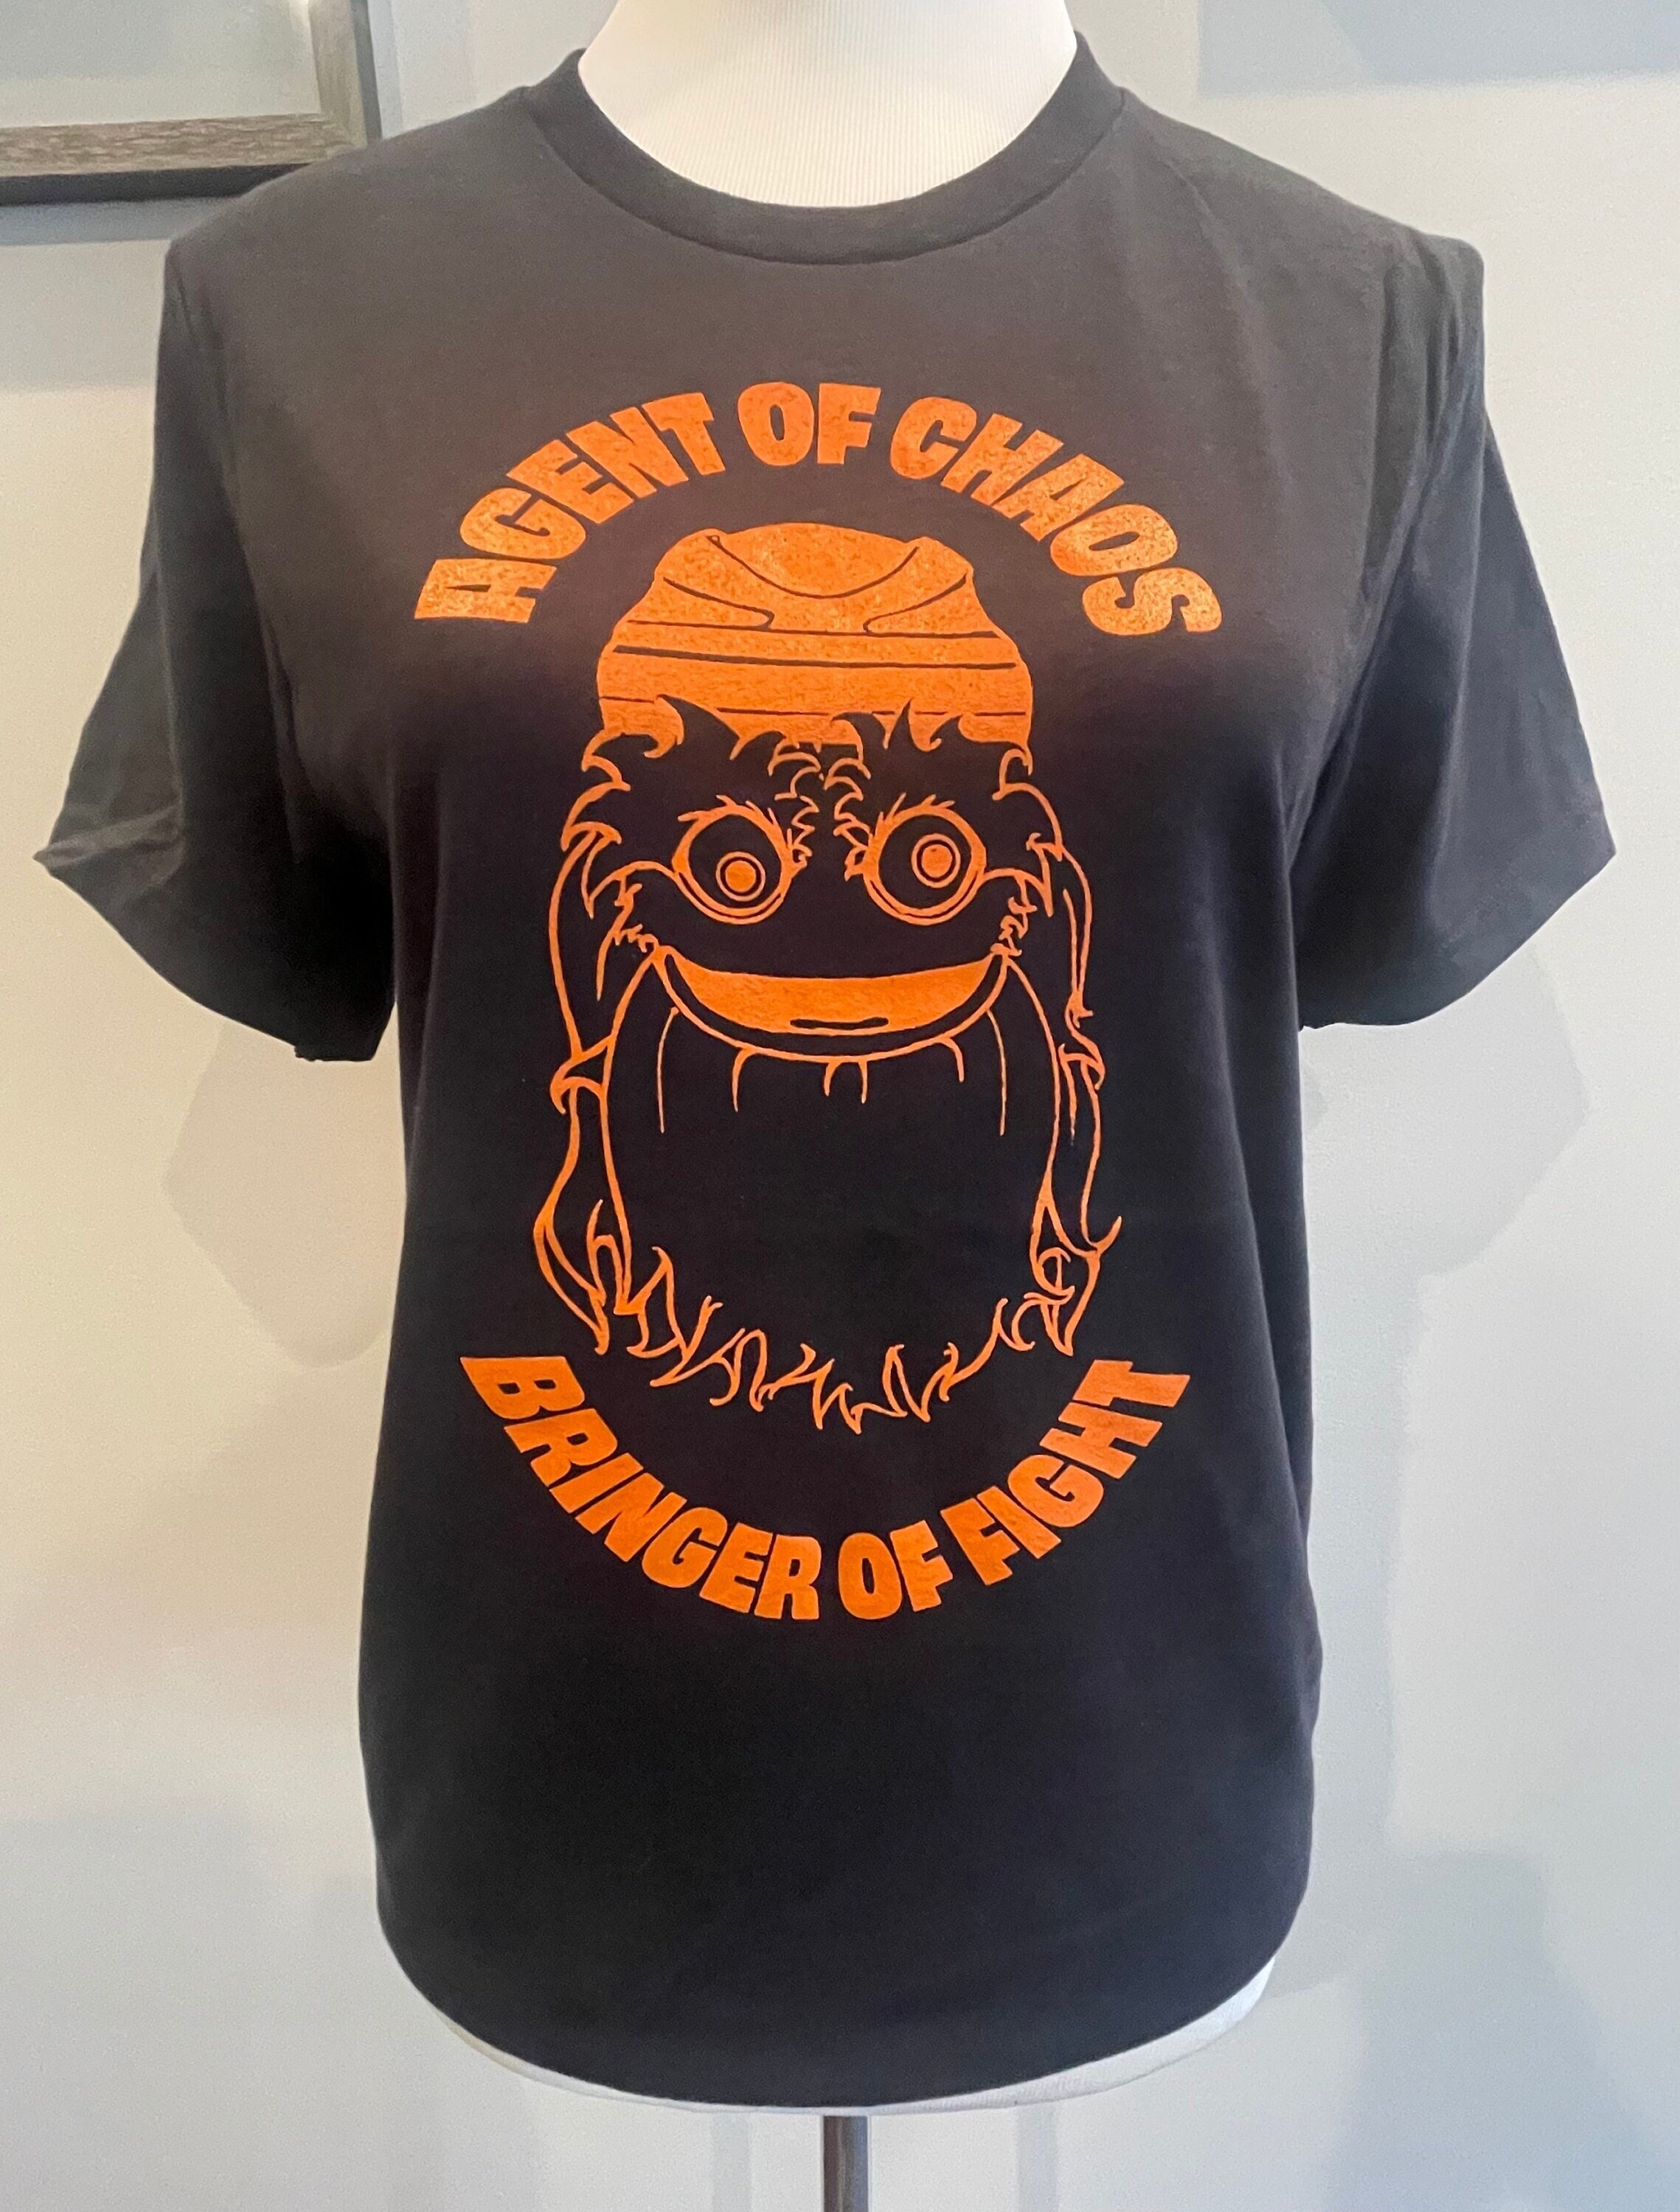 Gritty Tshirt Agent of Chaos black 